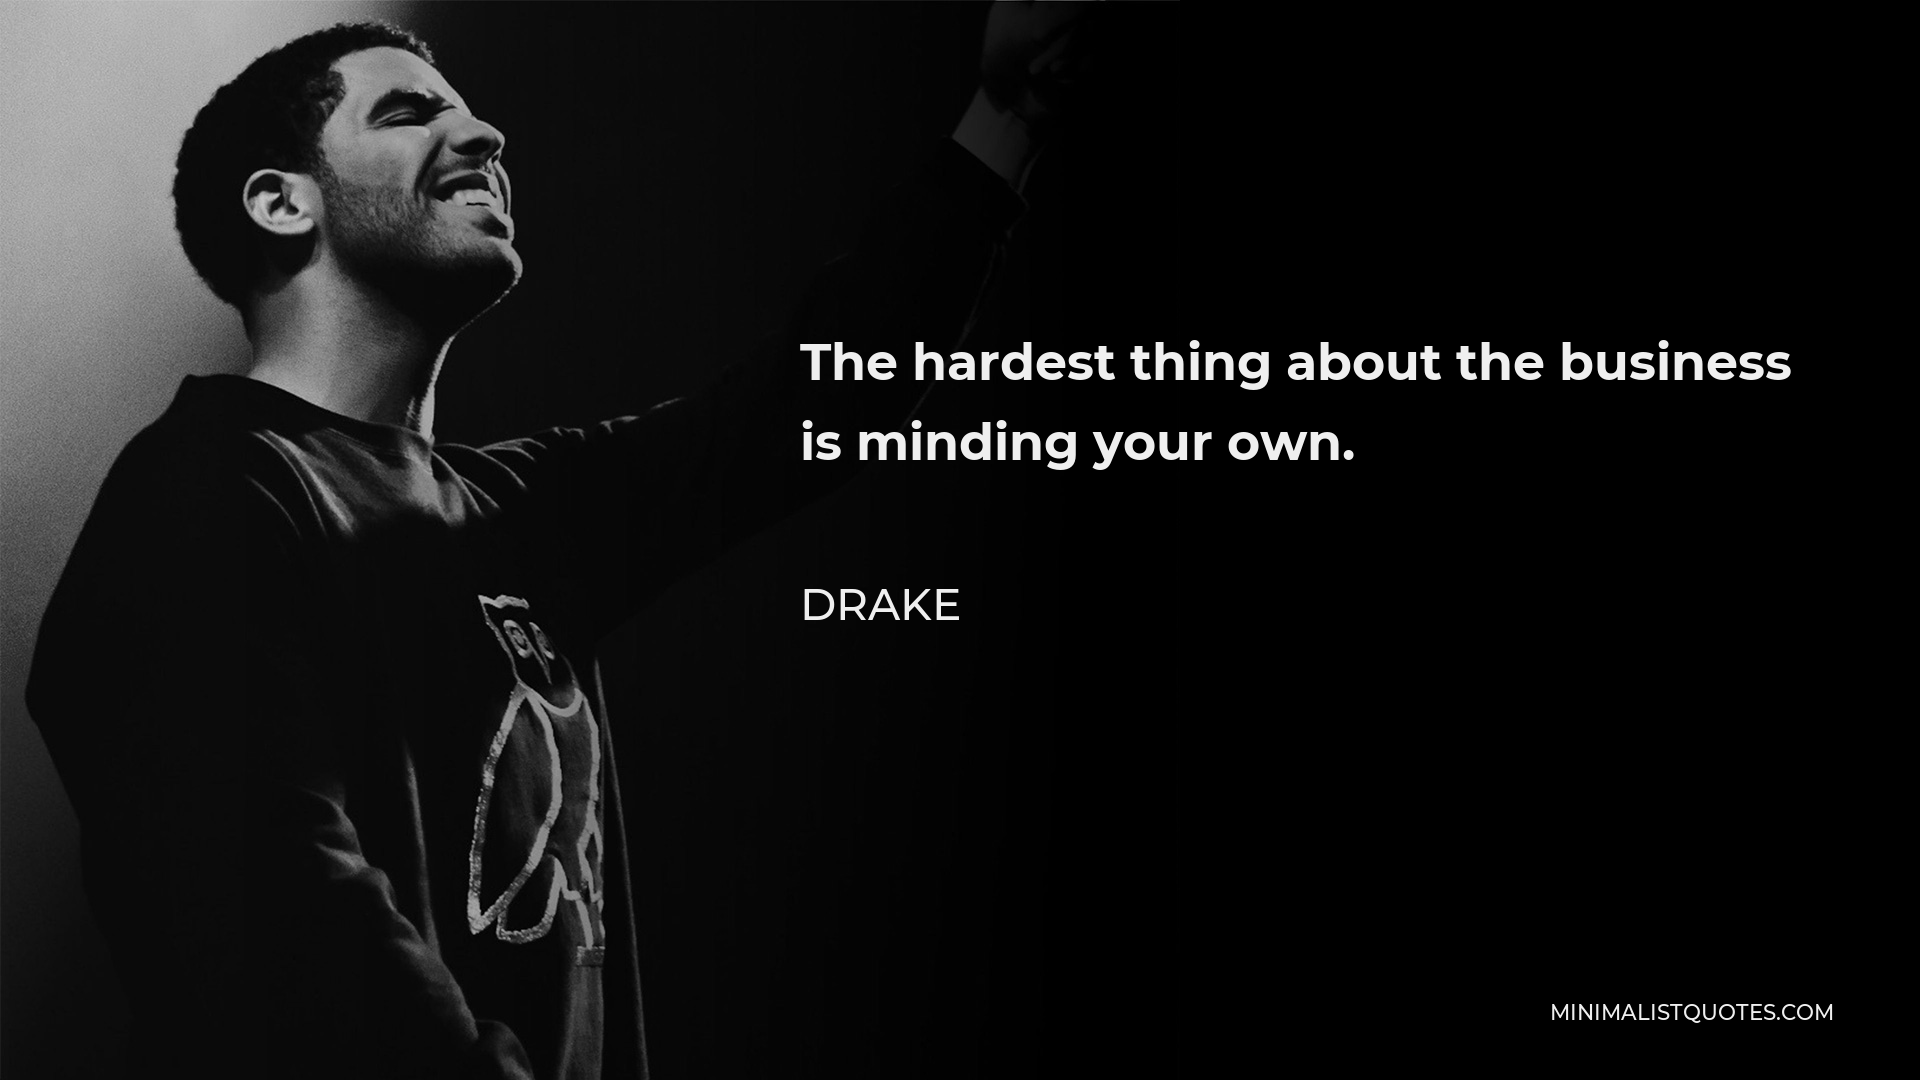 Drake Quote - The hardest thing about the business is minding your own.